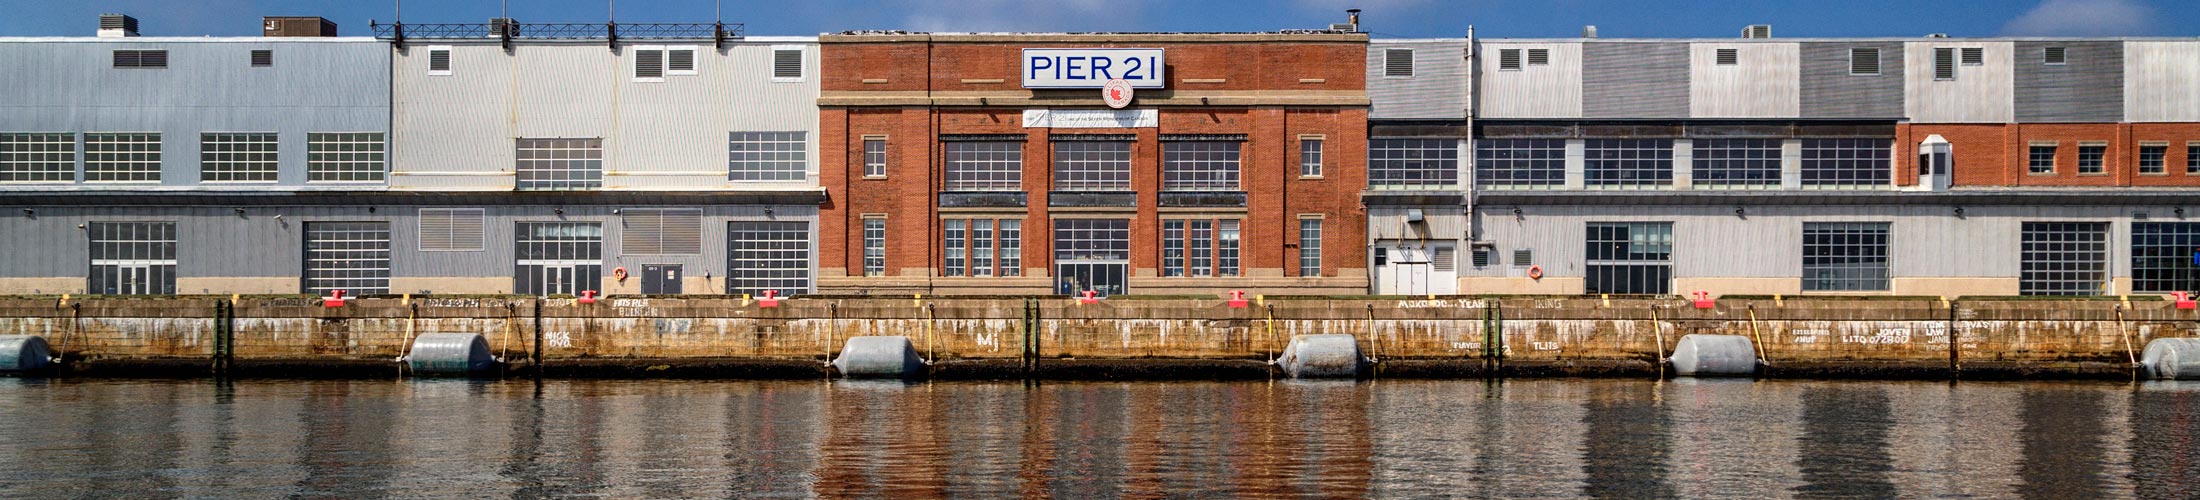 From the Atlantic Ocean, the Pier 21 building stands out from the other buildings along the Halifax seaport.